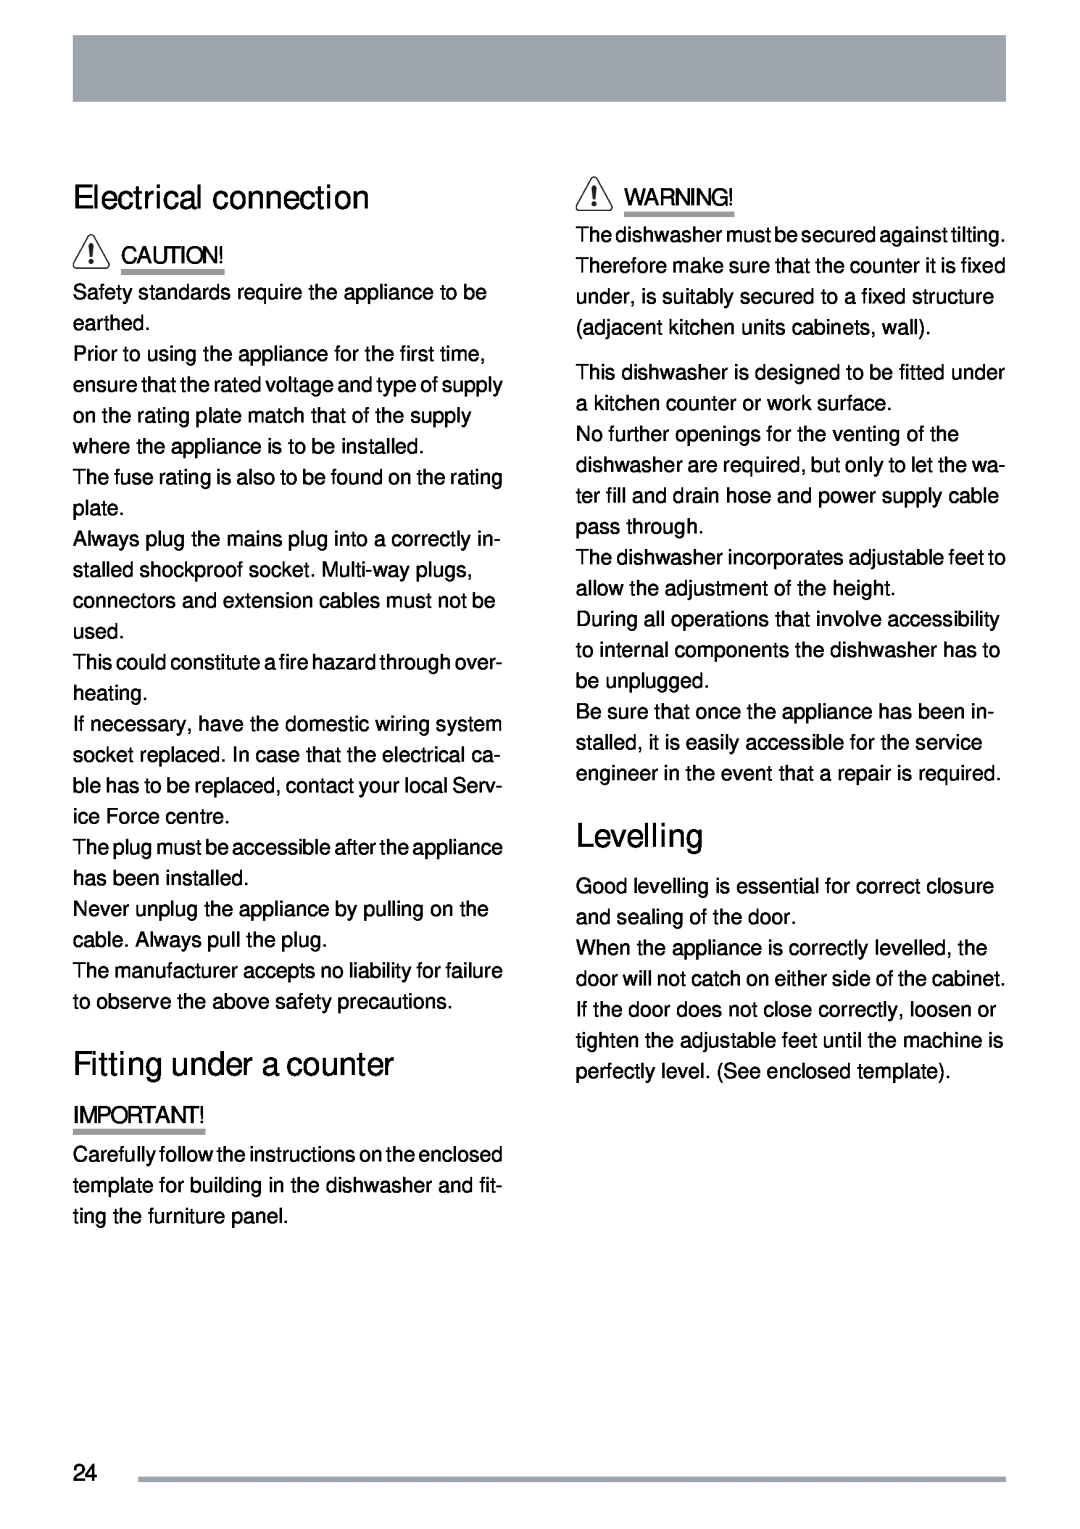 Zanussi ZDTS 101 user manual Electrical connection, Fitting under a counter, Levelling 